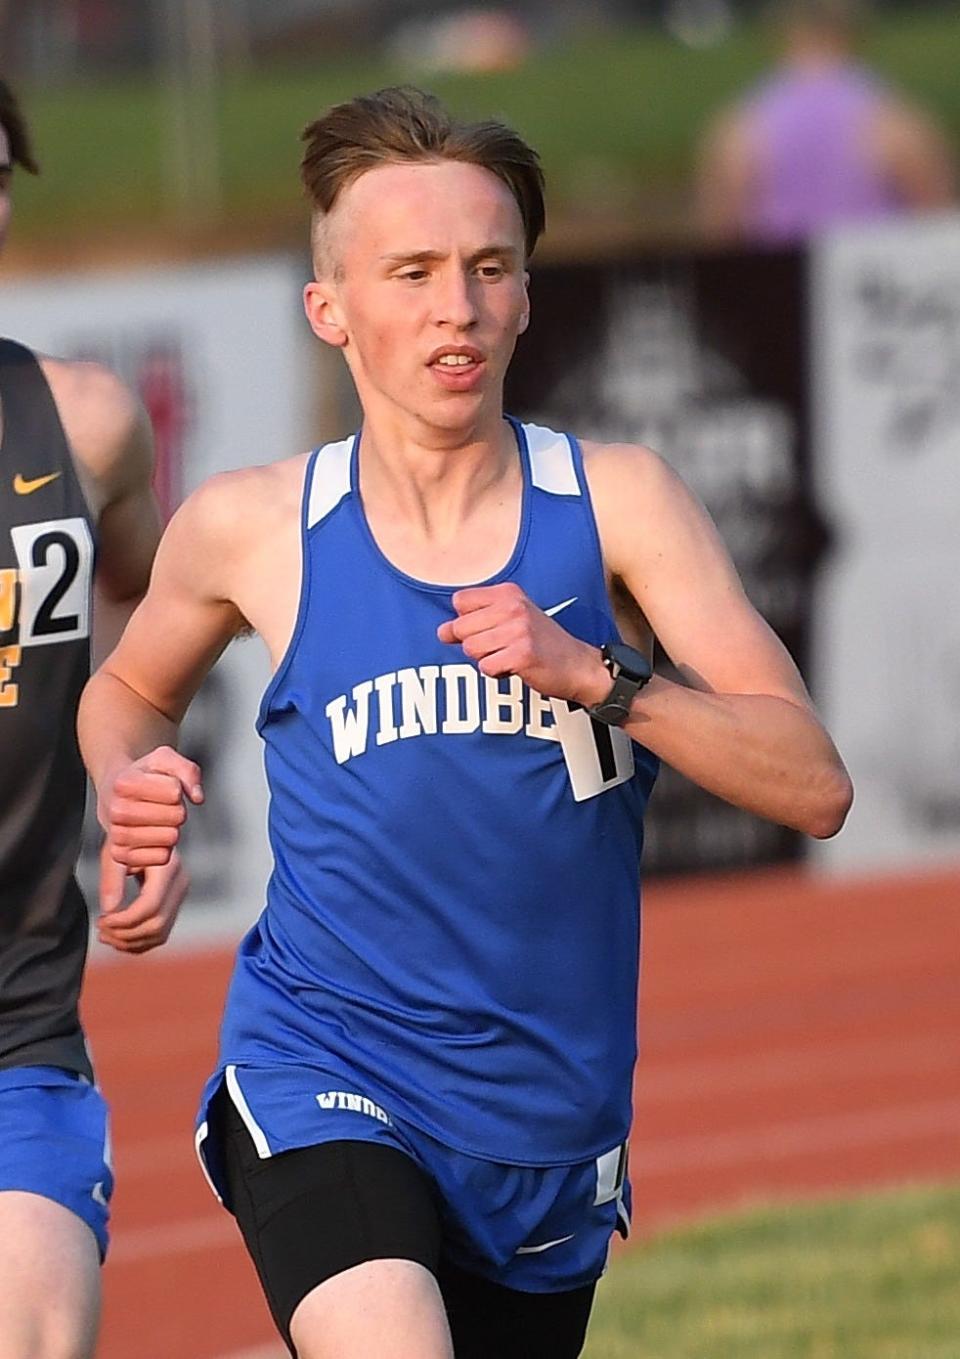 Windber's Joe McKelvey competes in the boys 3200-meter run during the District 5 Class 2A Track and Field Championships, Wednesday, at Northern Bedford High School.